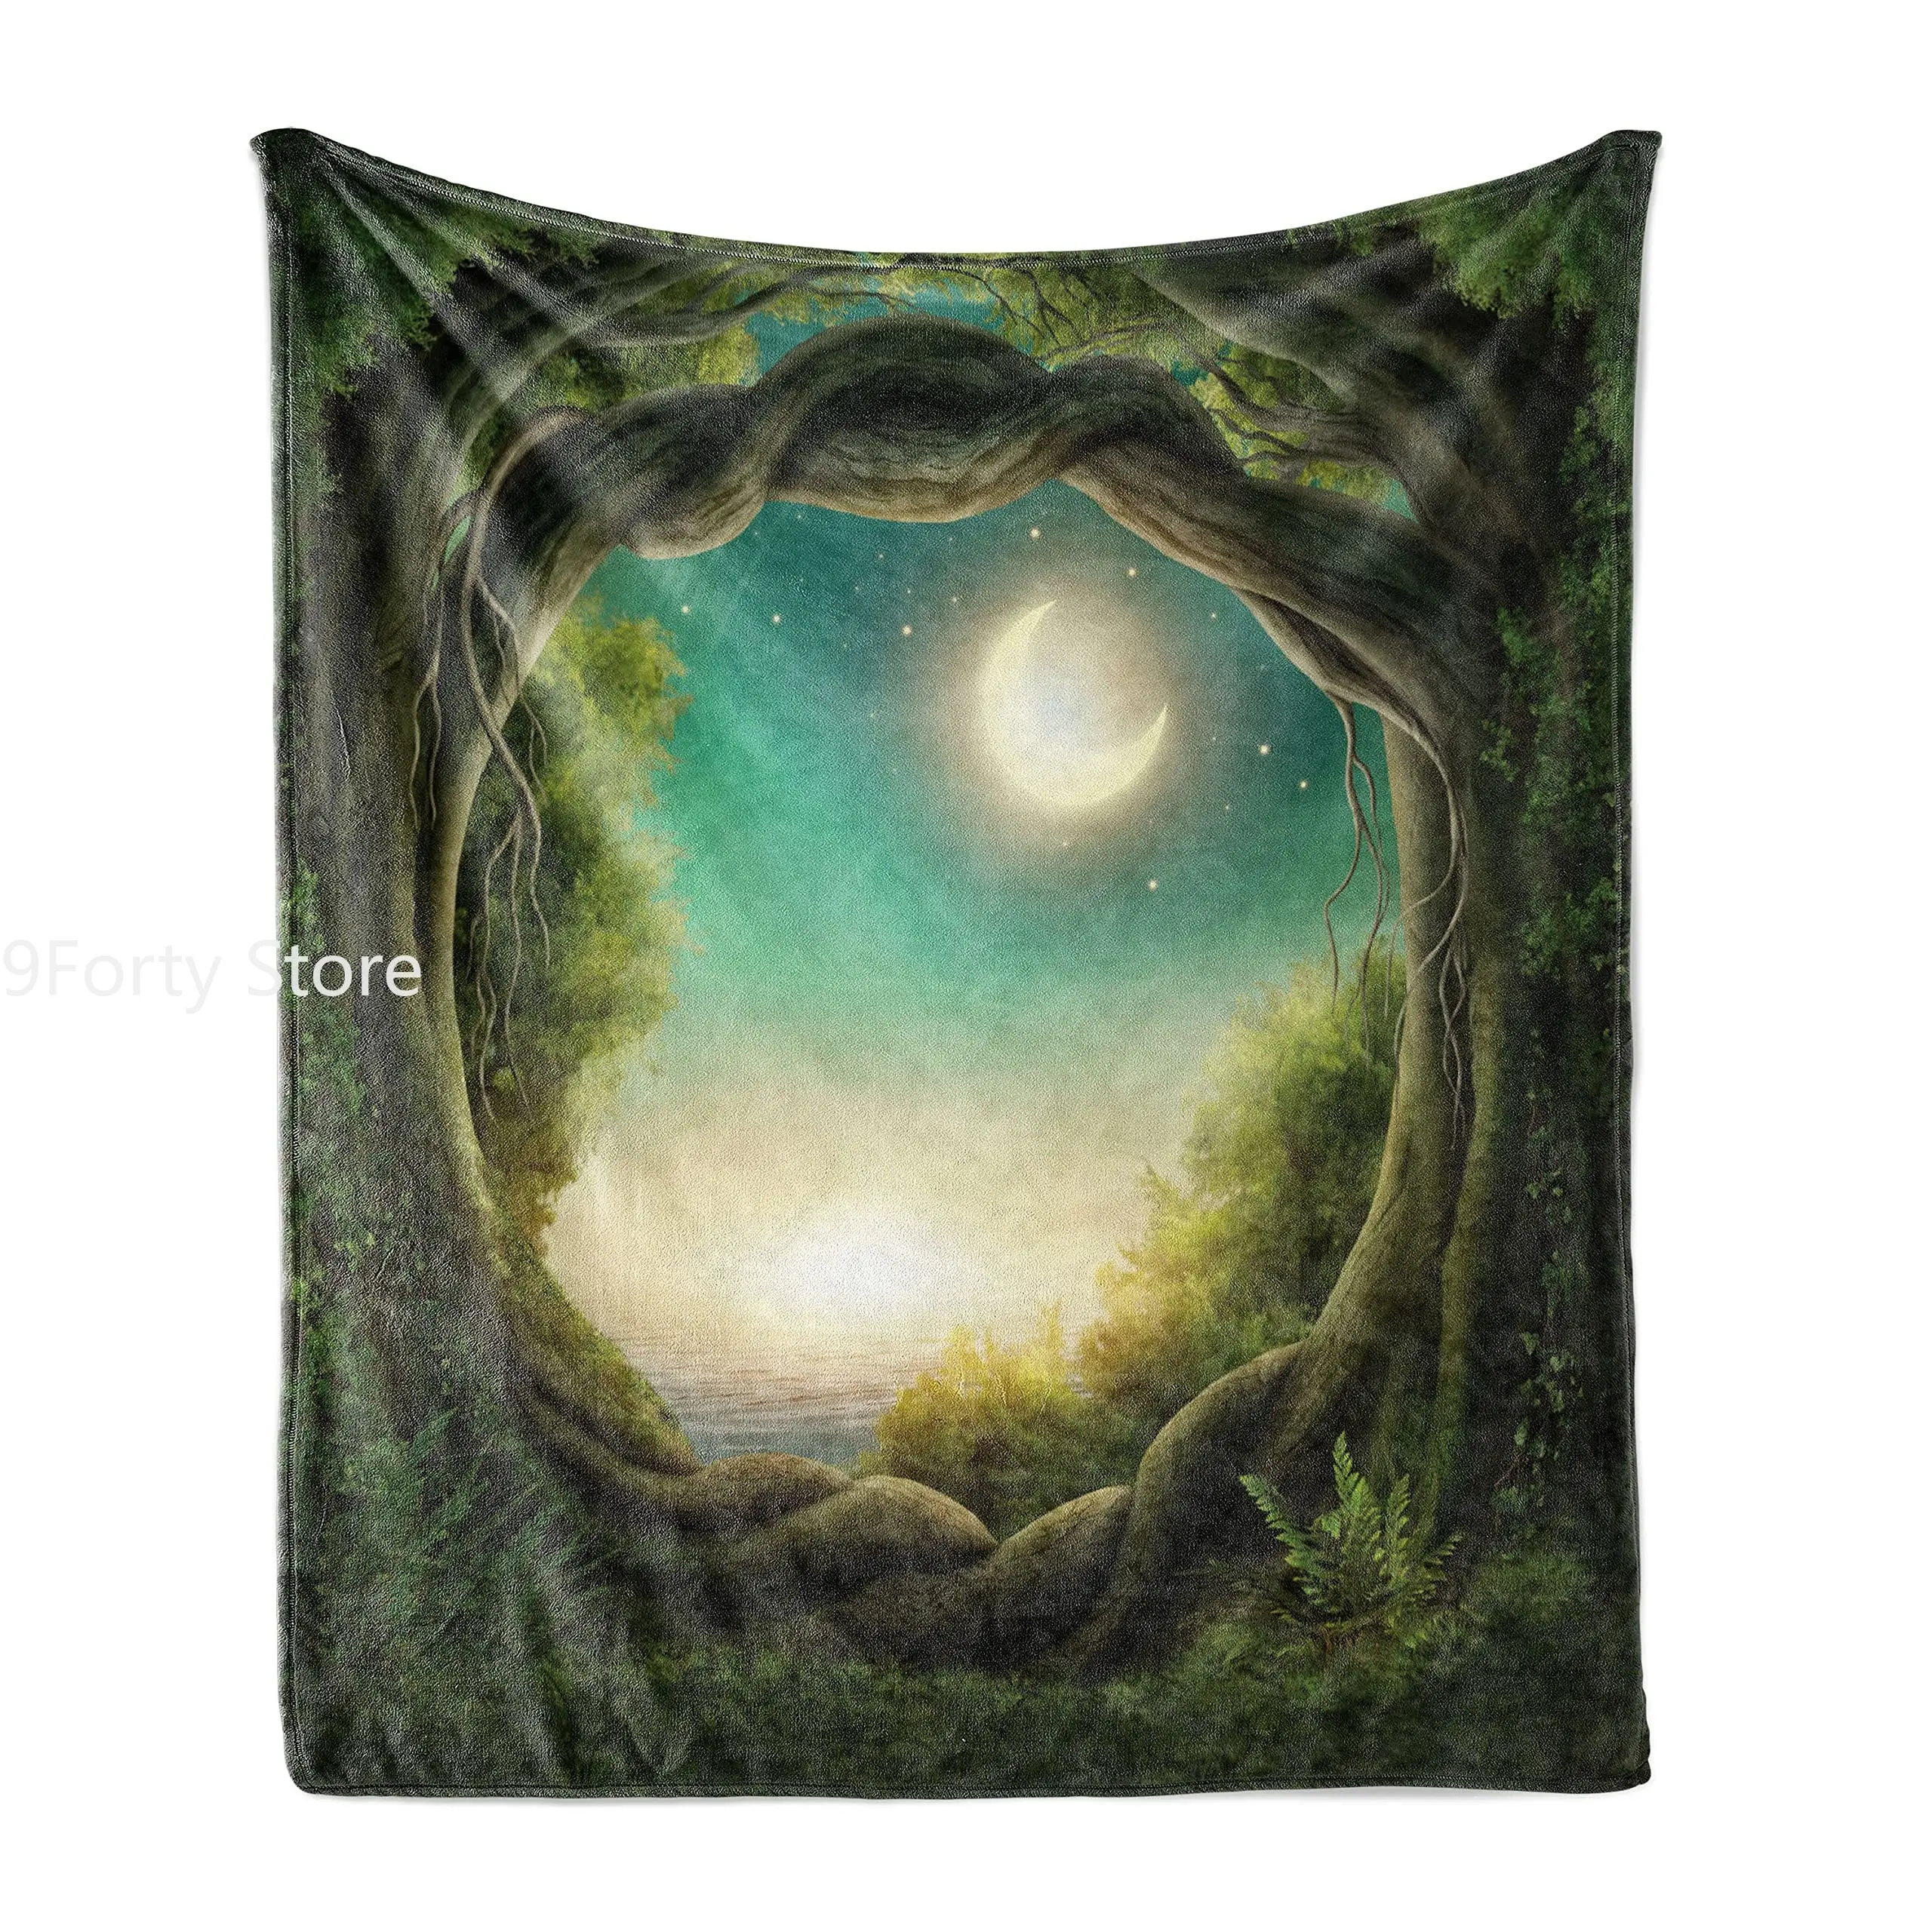 

Forest Throw Blanket Curly Branches Trees In Enchanted Forest Full Moon In Night Sky Illustration Flannel Blanket for Adult Gift